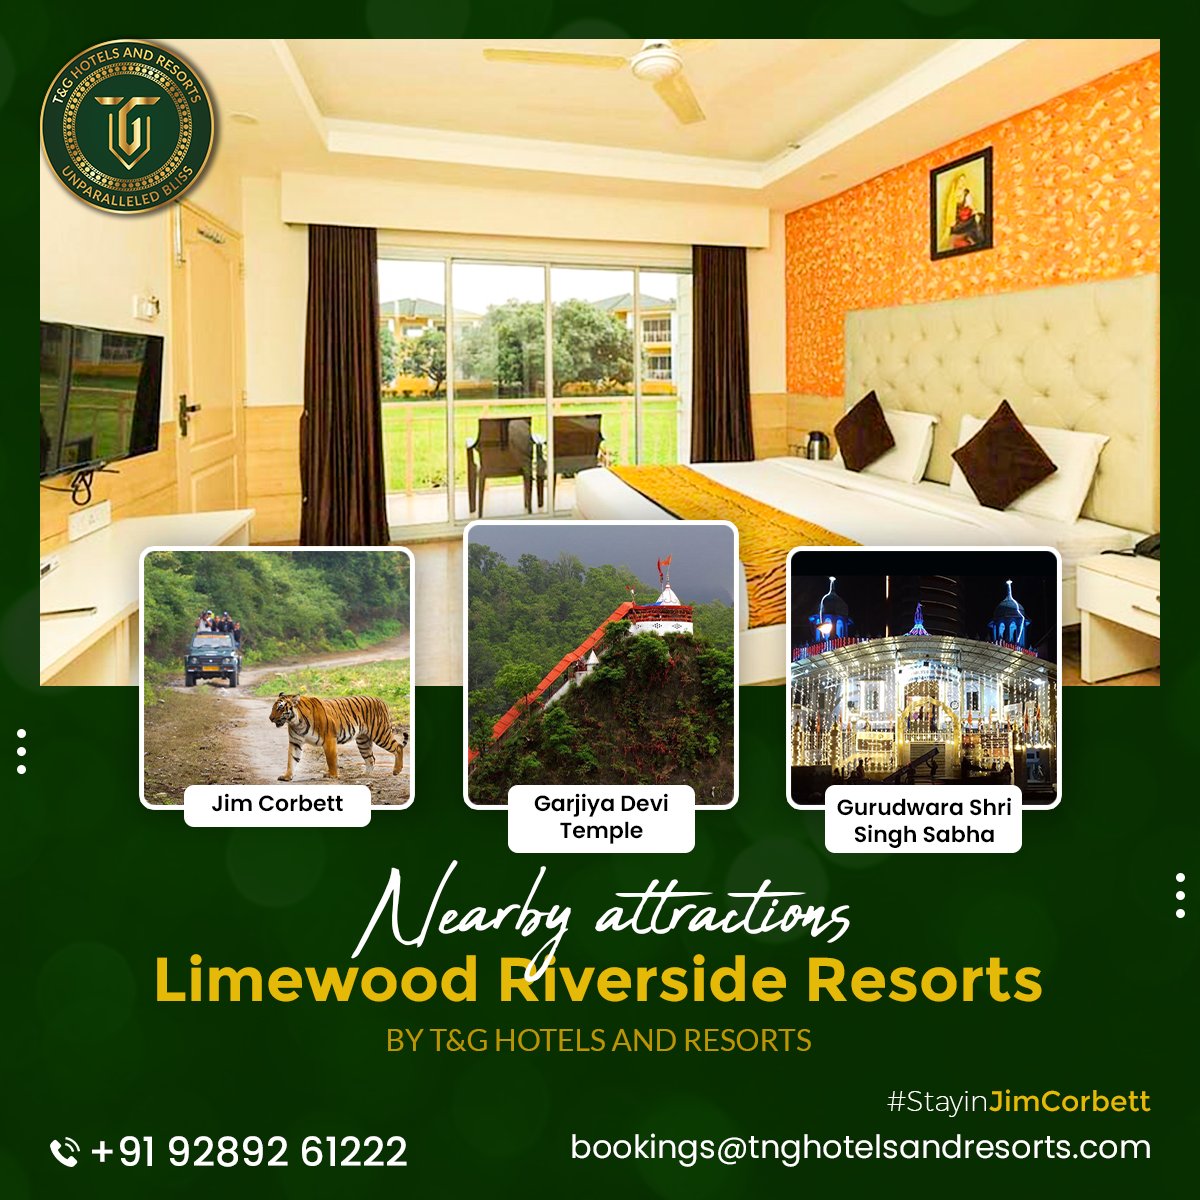 Escape to serenity at Limewood Riverside Resorts by T&G Hotels and Resorts, where nature's embrace meets luxury retreat. 
For more info visit : bit.ly/4d3JpVQ or call us : +91 9289261222
#tandghotelsandresorts #limewoodresorts #jimcorbett #jimcorbettnationalpark